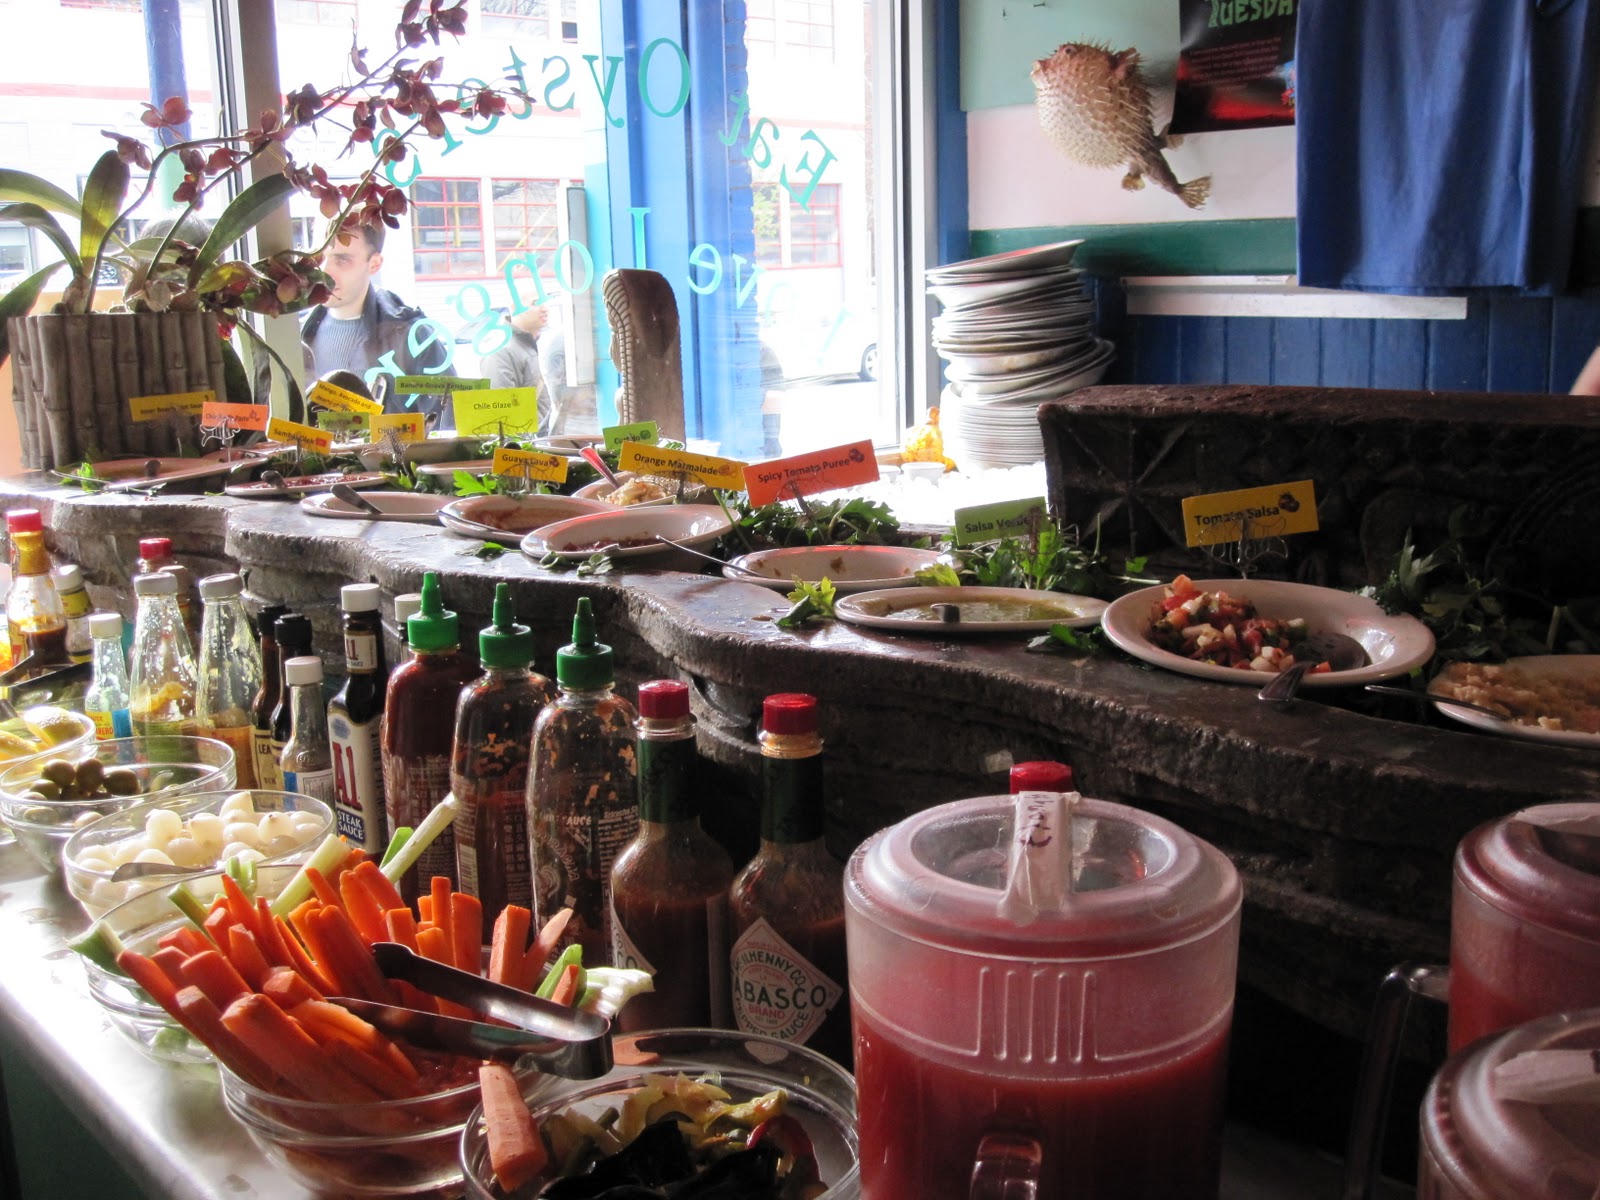 Bloody Mary Bar at East Coast Grill (photographer unknown)